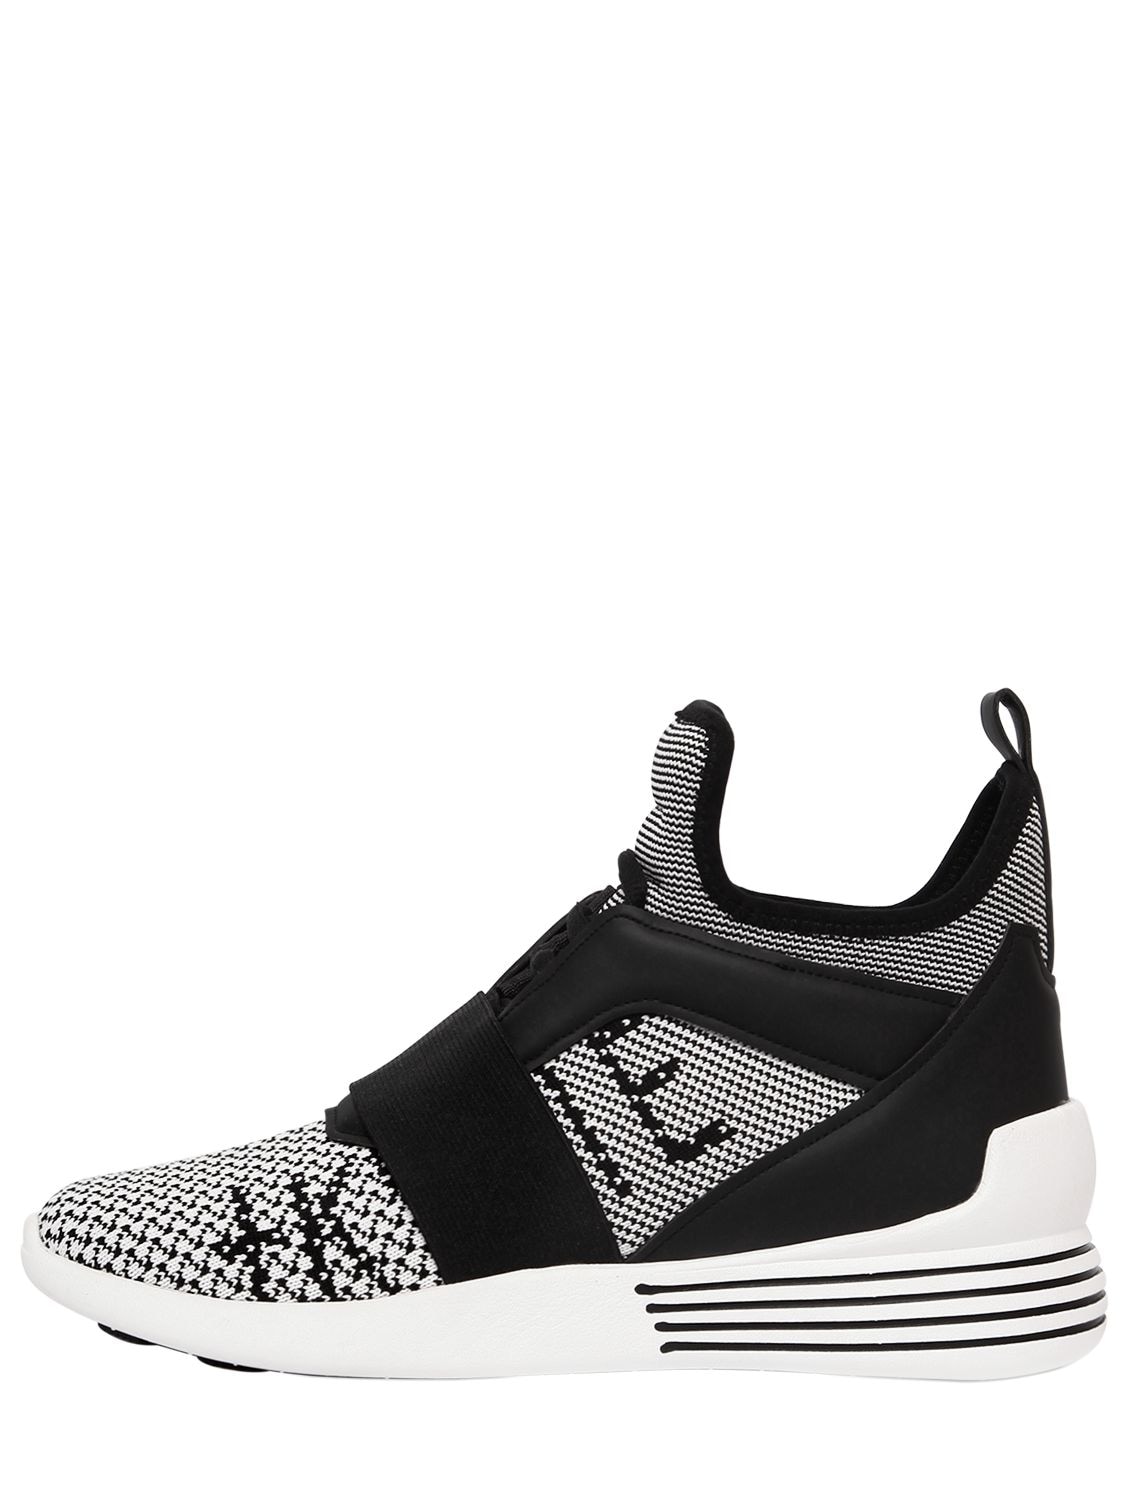 Kendall + Kylie 30mm Braydin Knit Sneakers In Black/white